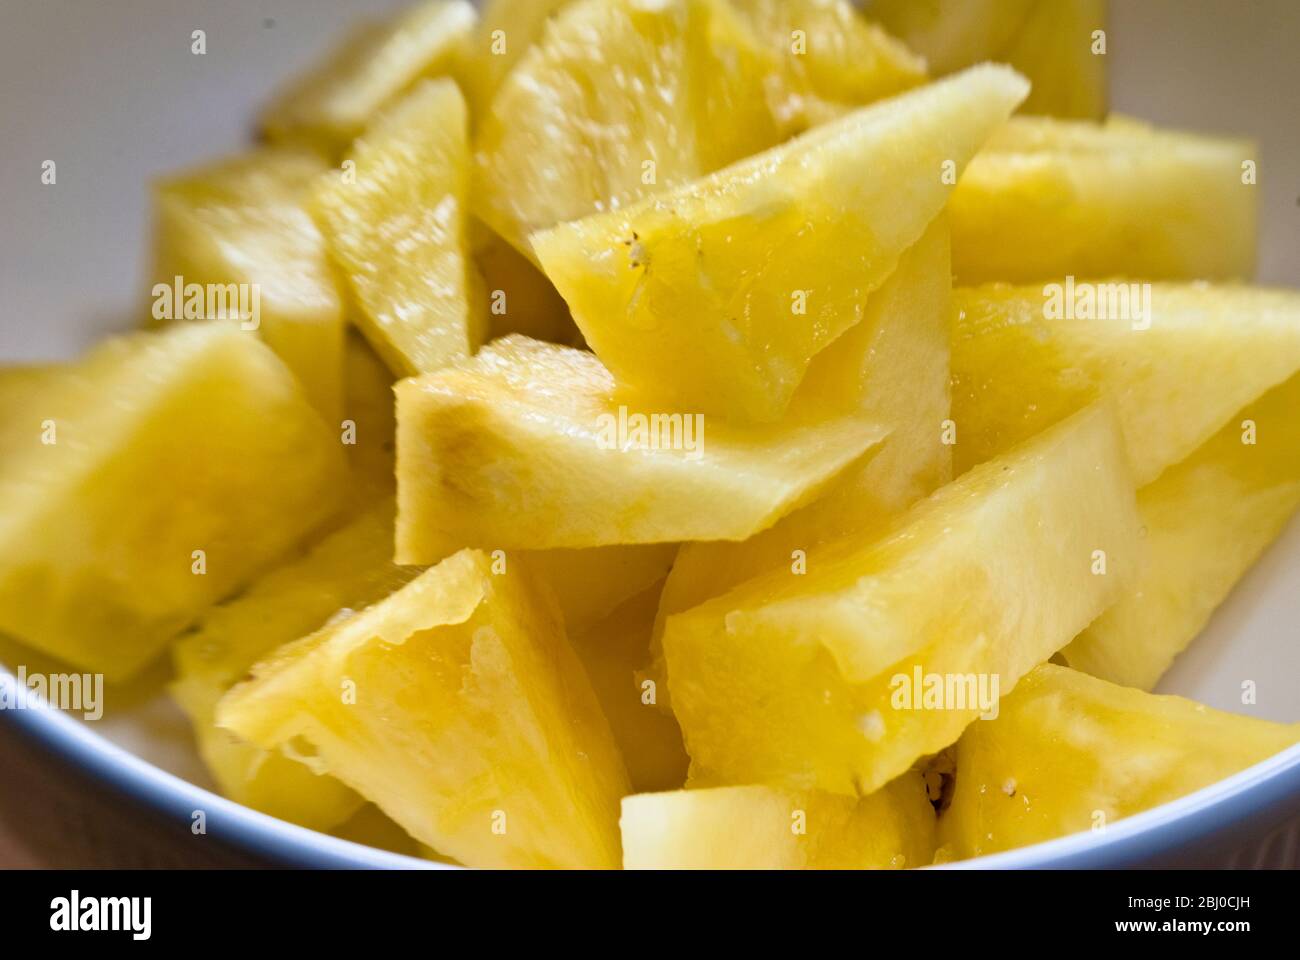 Freshly cut pieces of whole pineapple in white bowl - Stock Photo